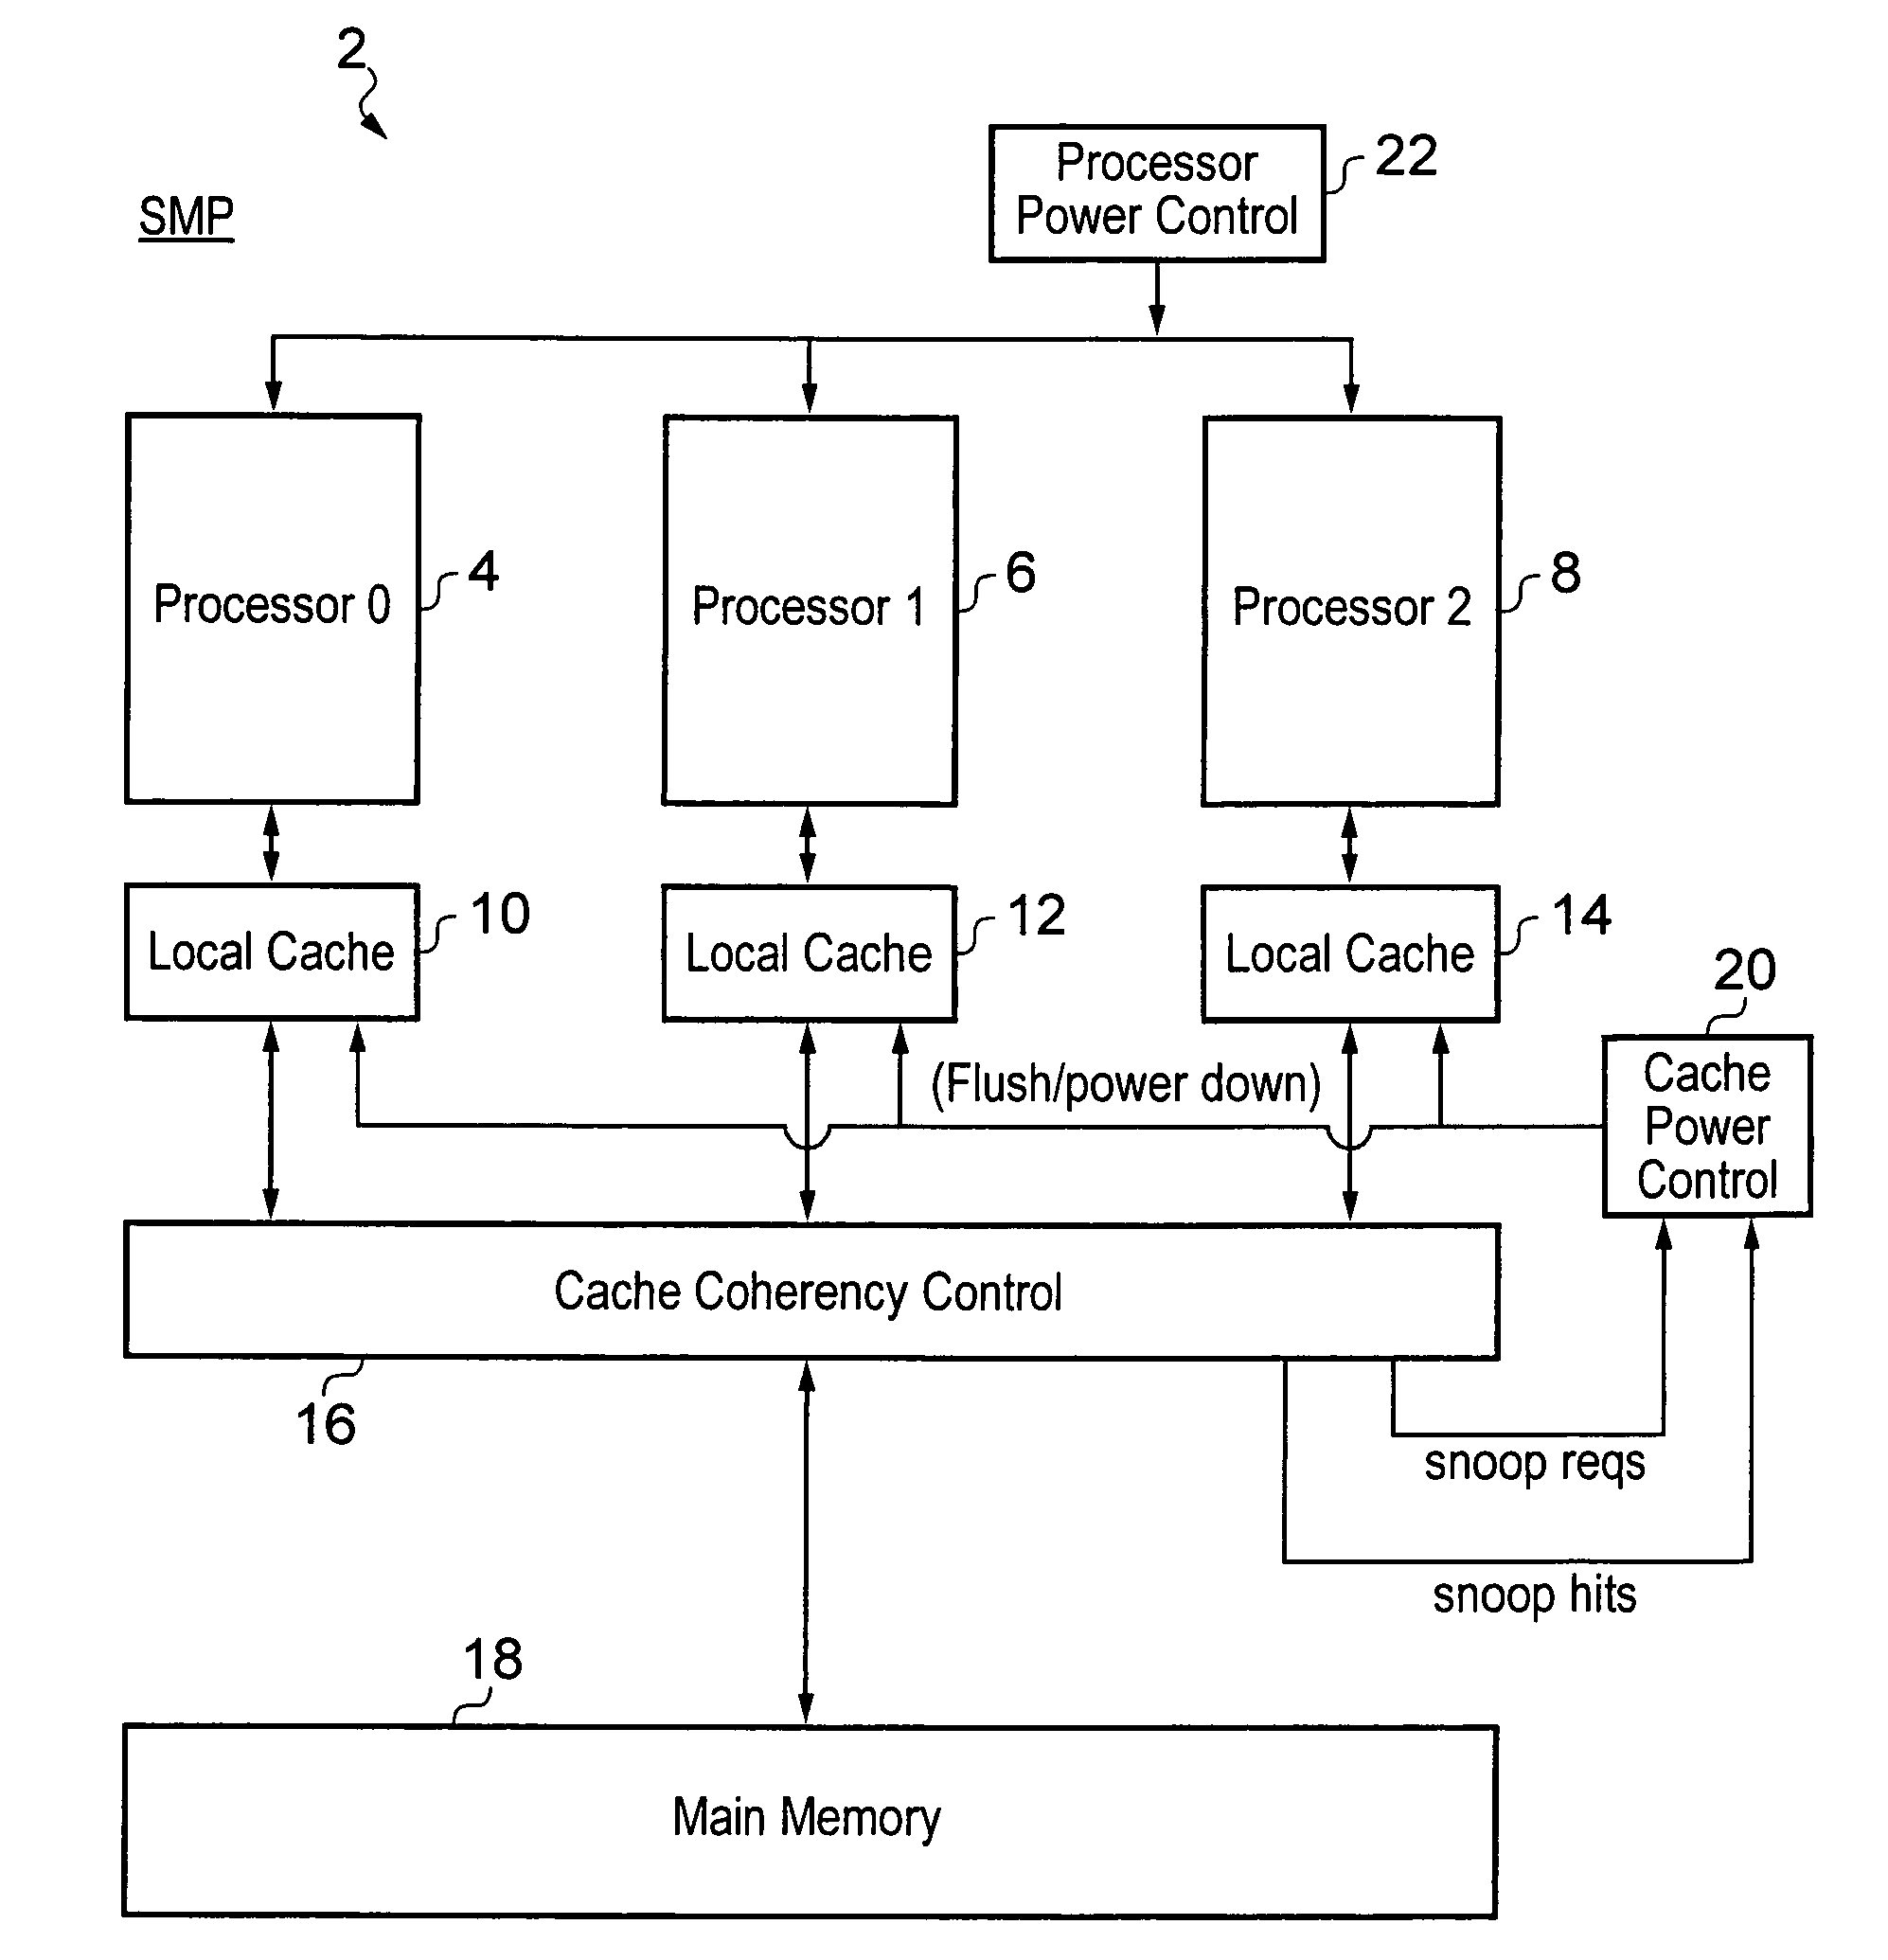 Local cache power control within a multiprocessor system